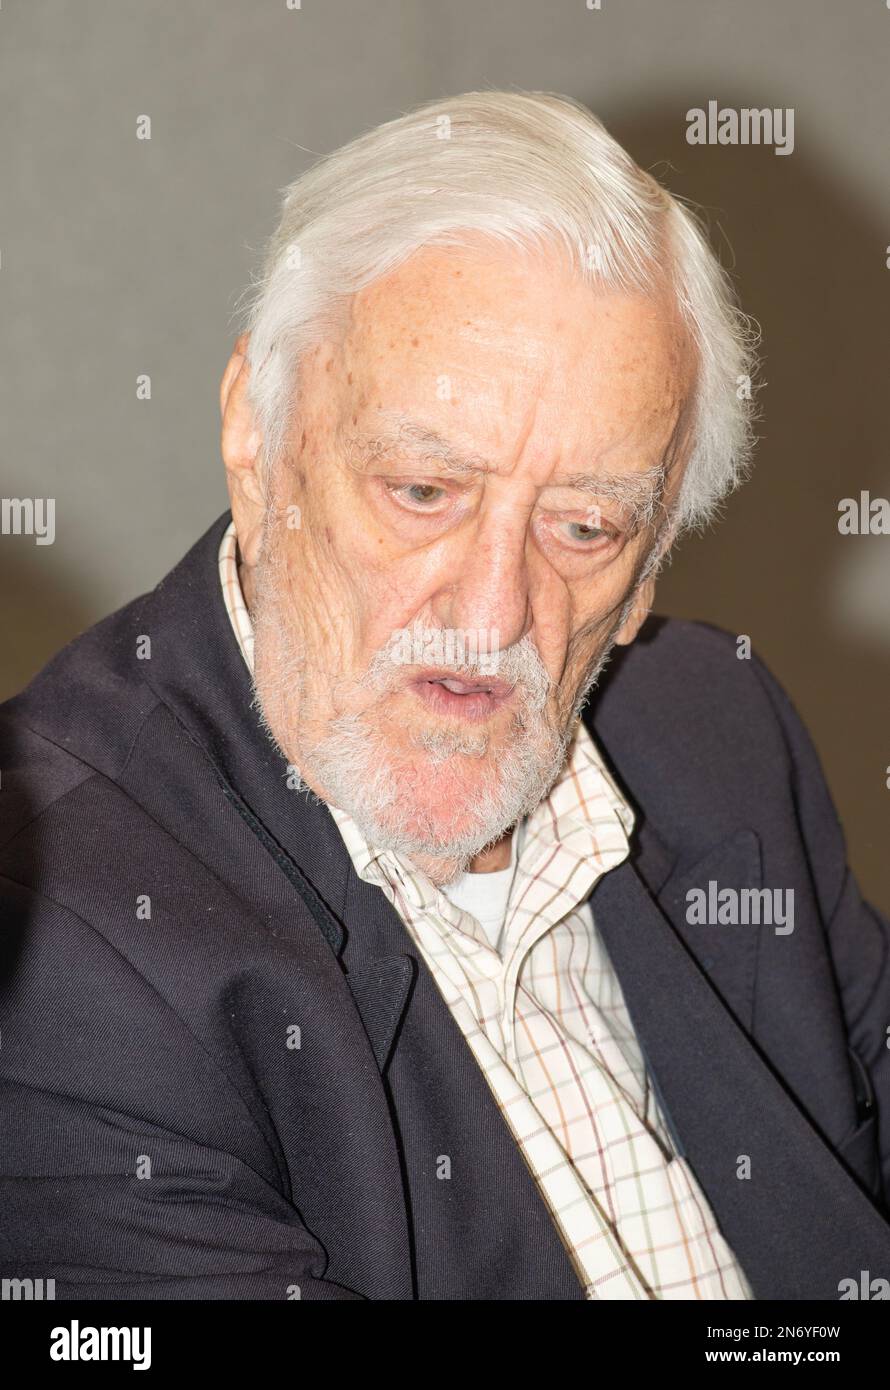 Portrait of British actor Bernard Cribbins, at the 2017 London Film Comic Con as a guest signer, at the Olympia London exhibition and event venue. Stock Photo